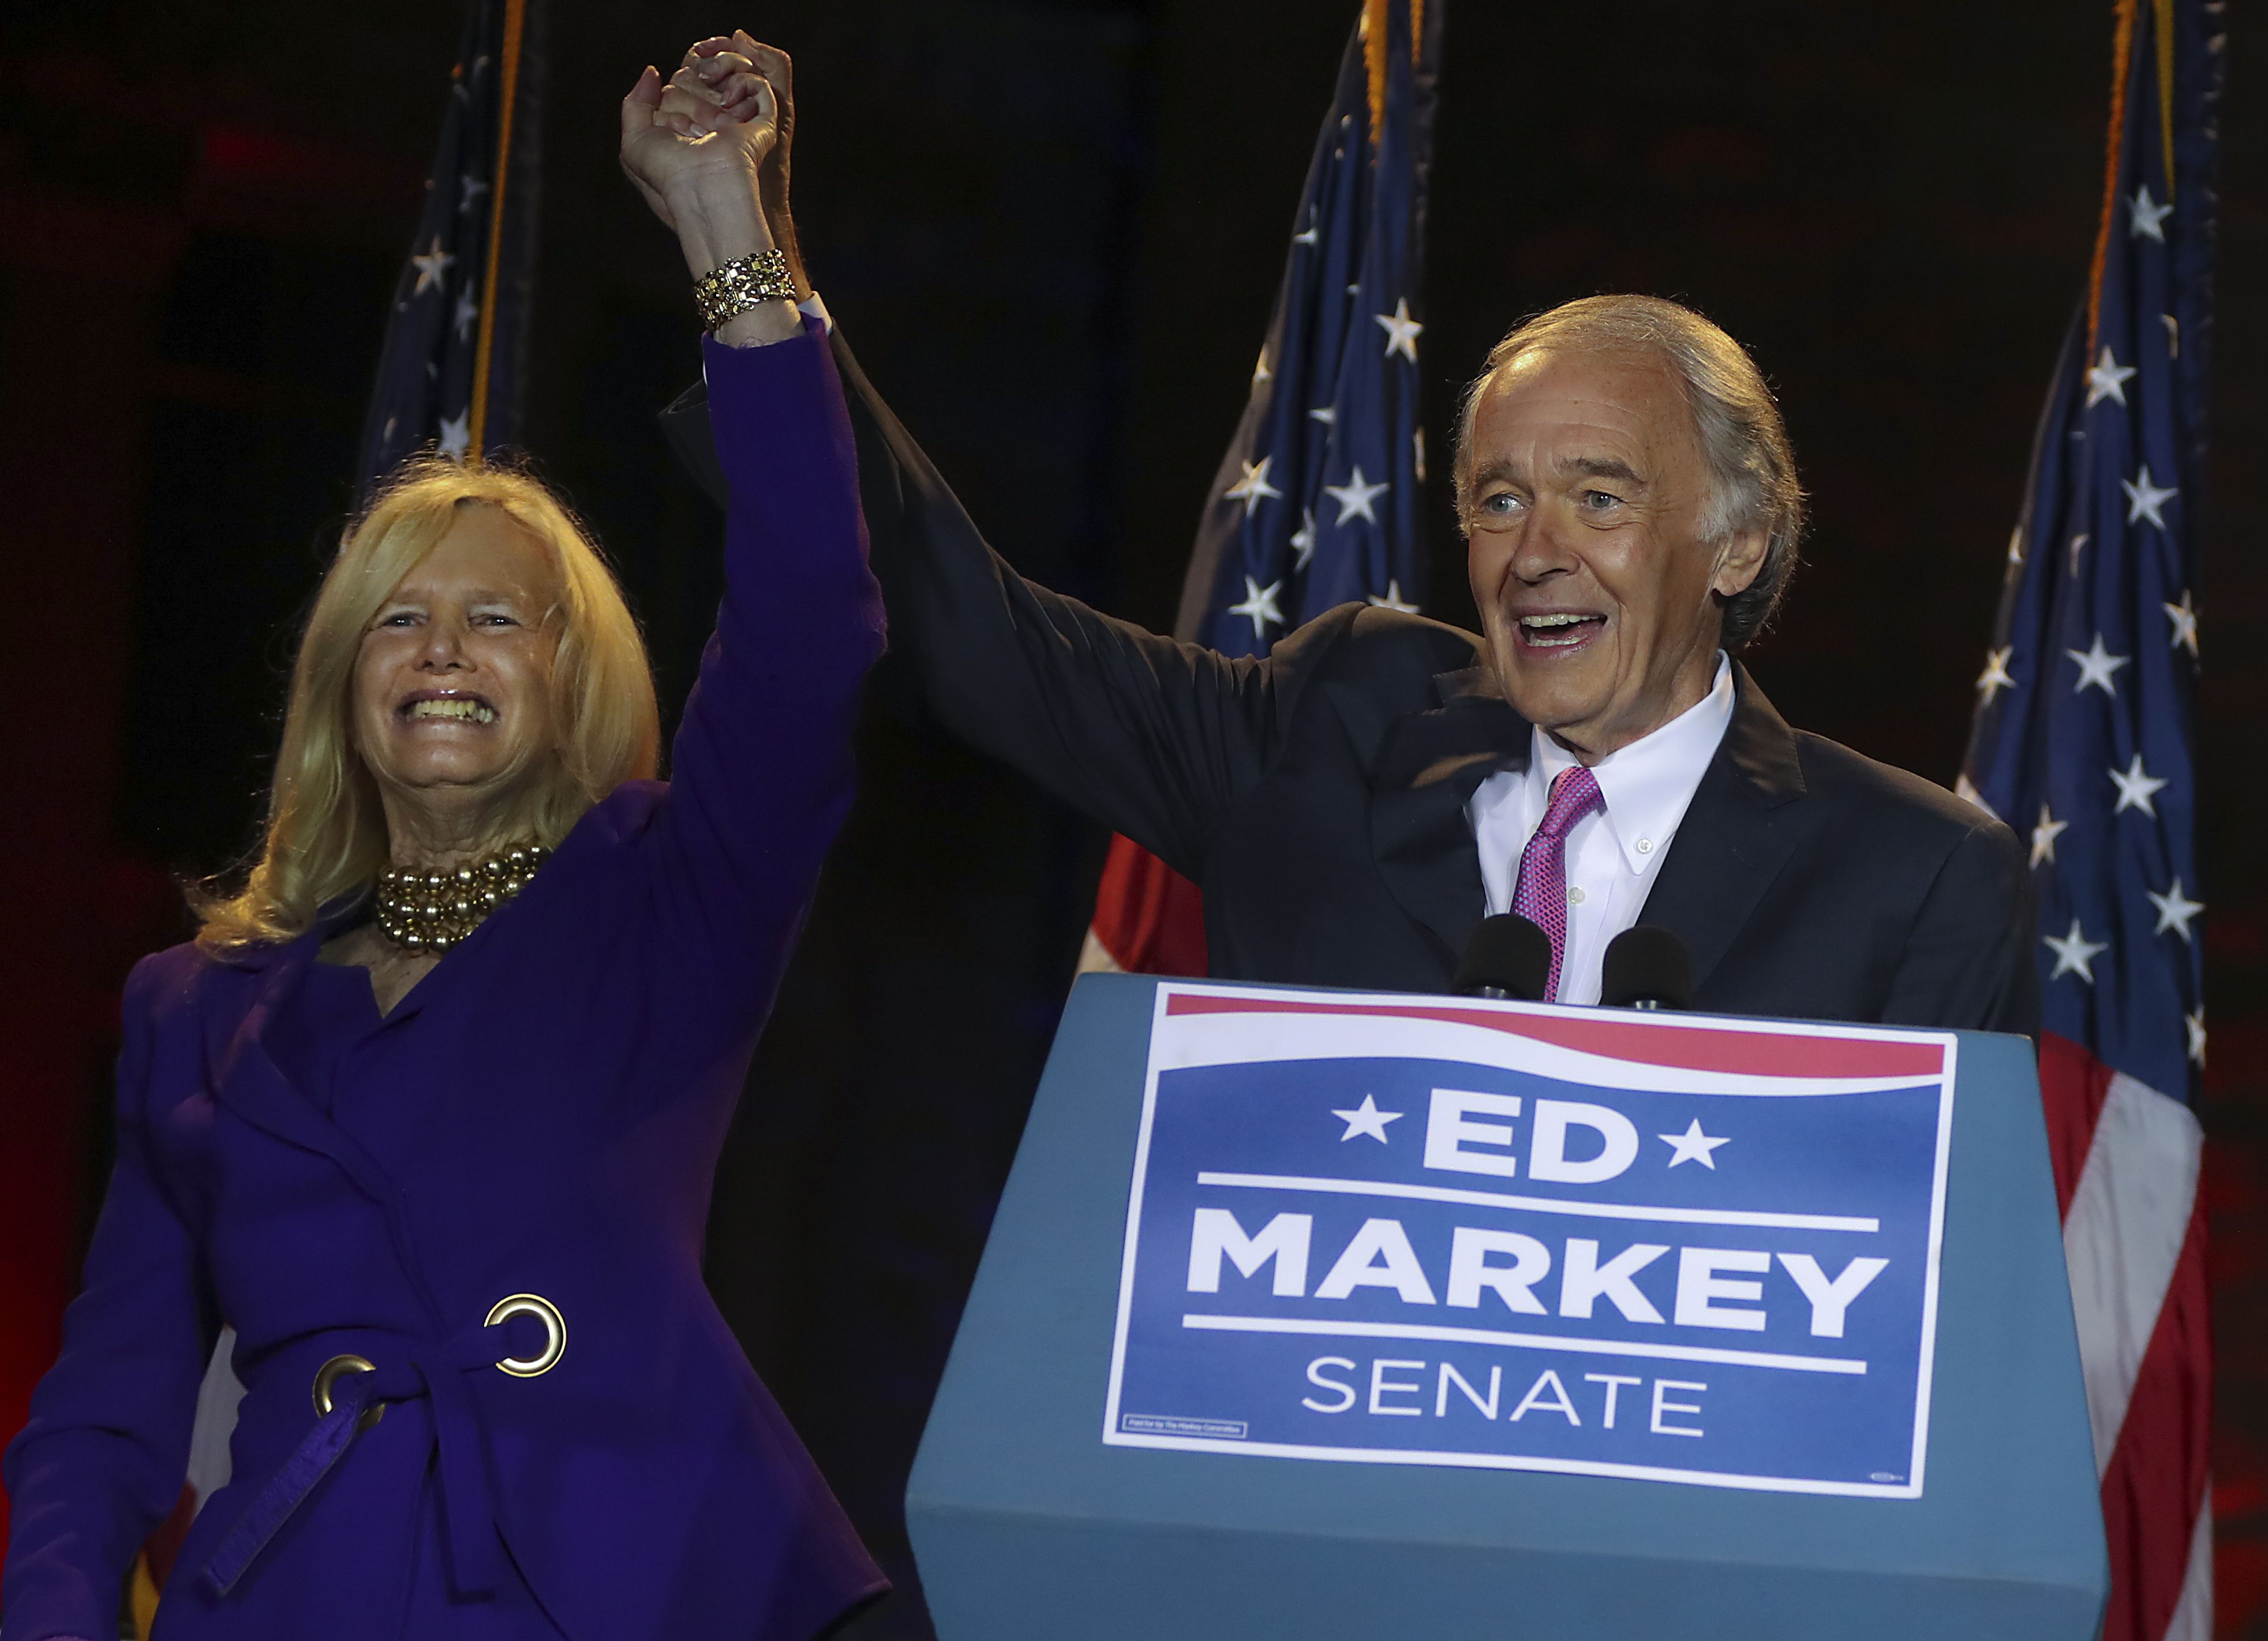 Ed Markey's the latest veteran politician to face a challenge on